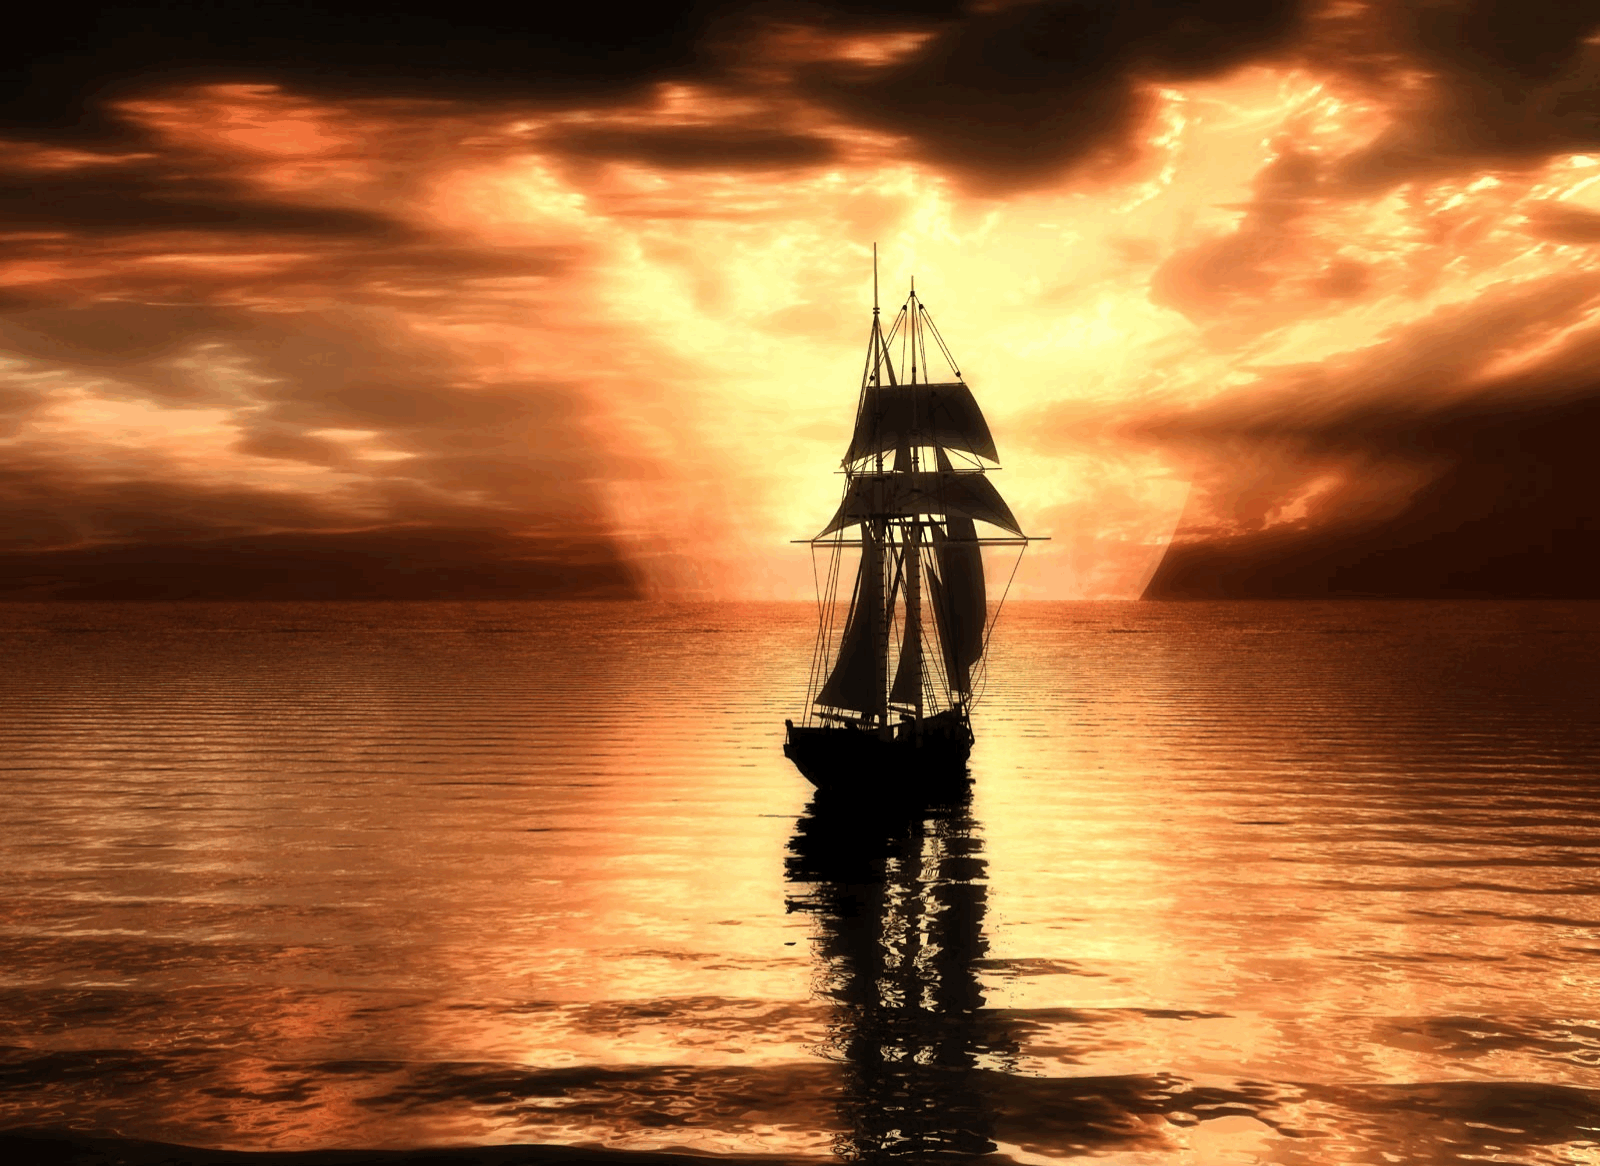 Vehicles For > Pirate Ship Wallpaper Sunset